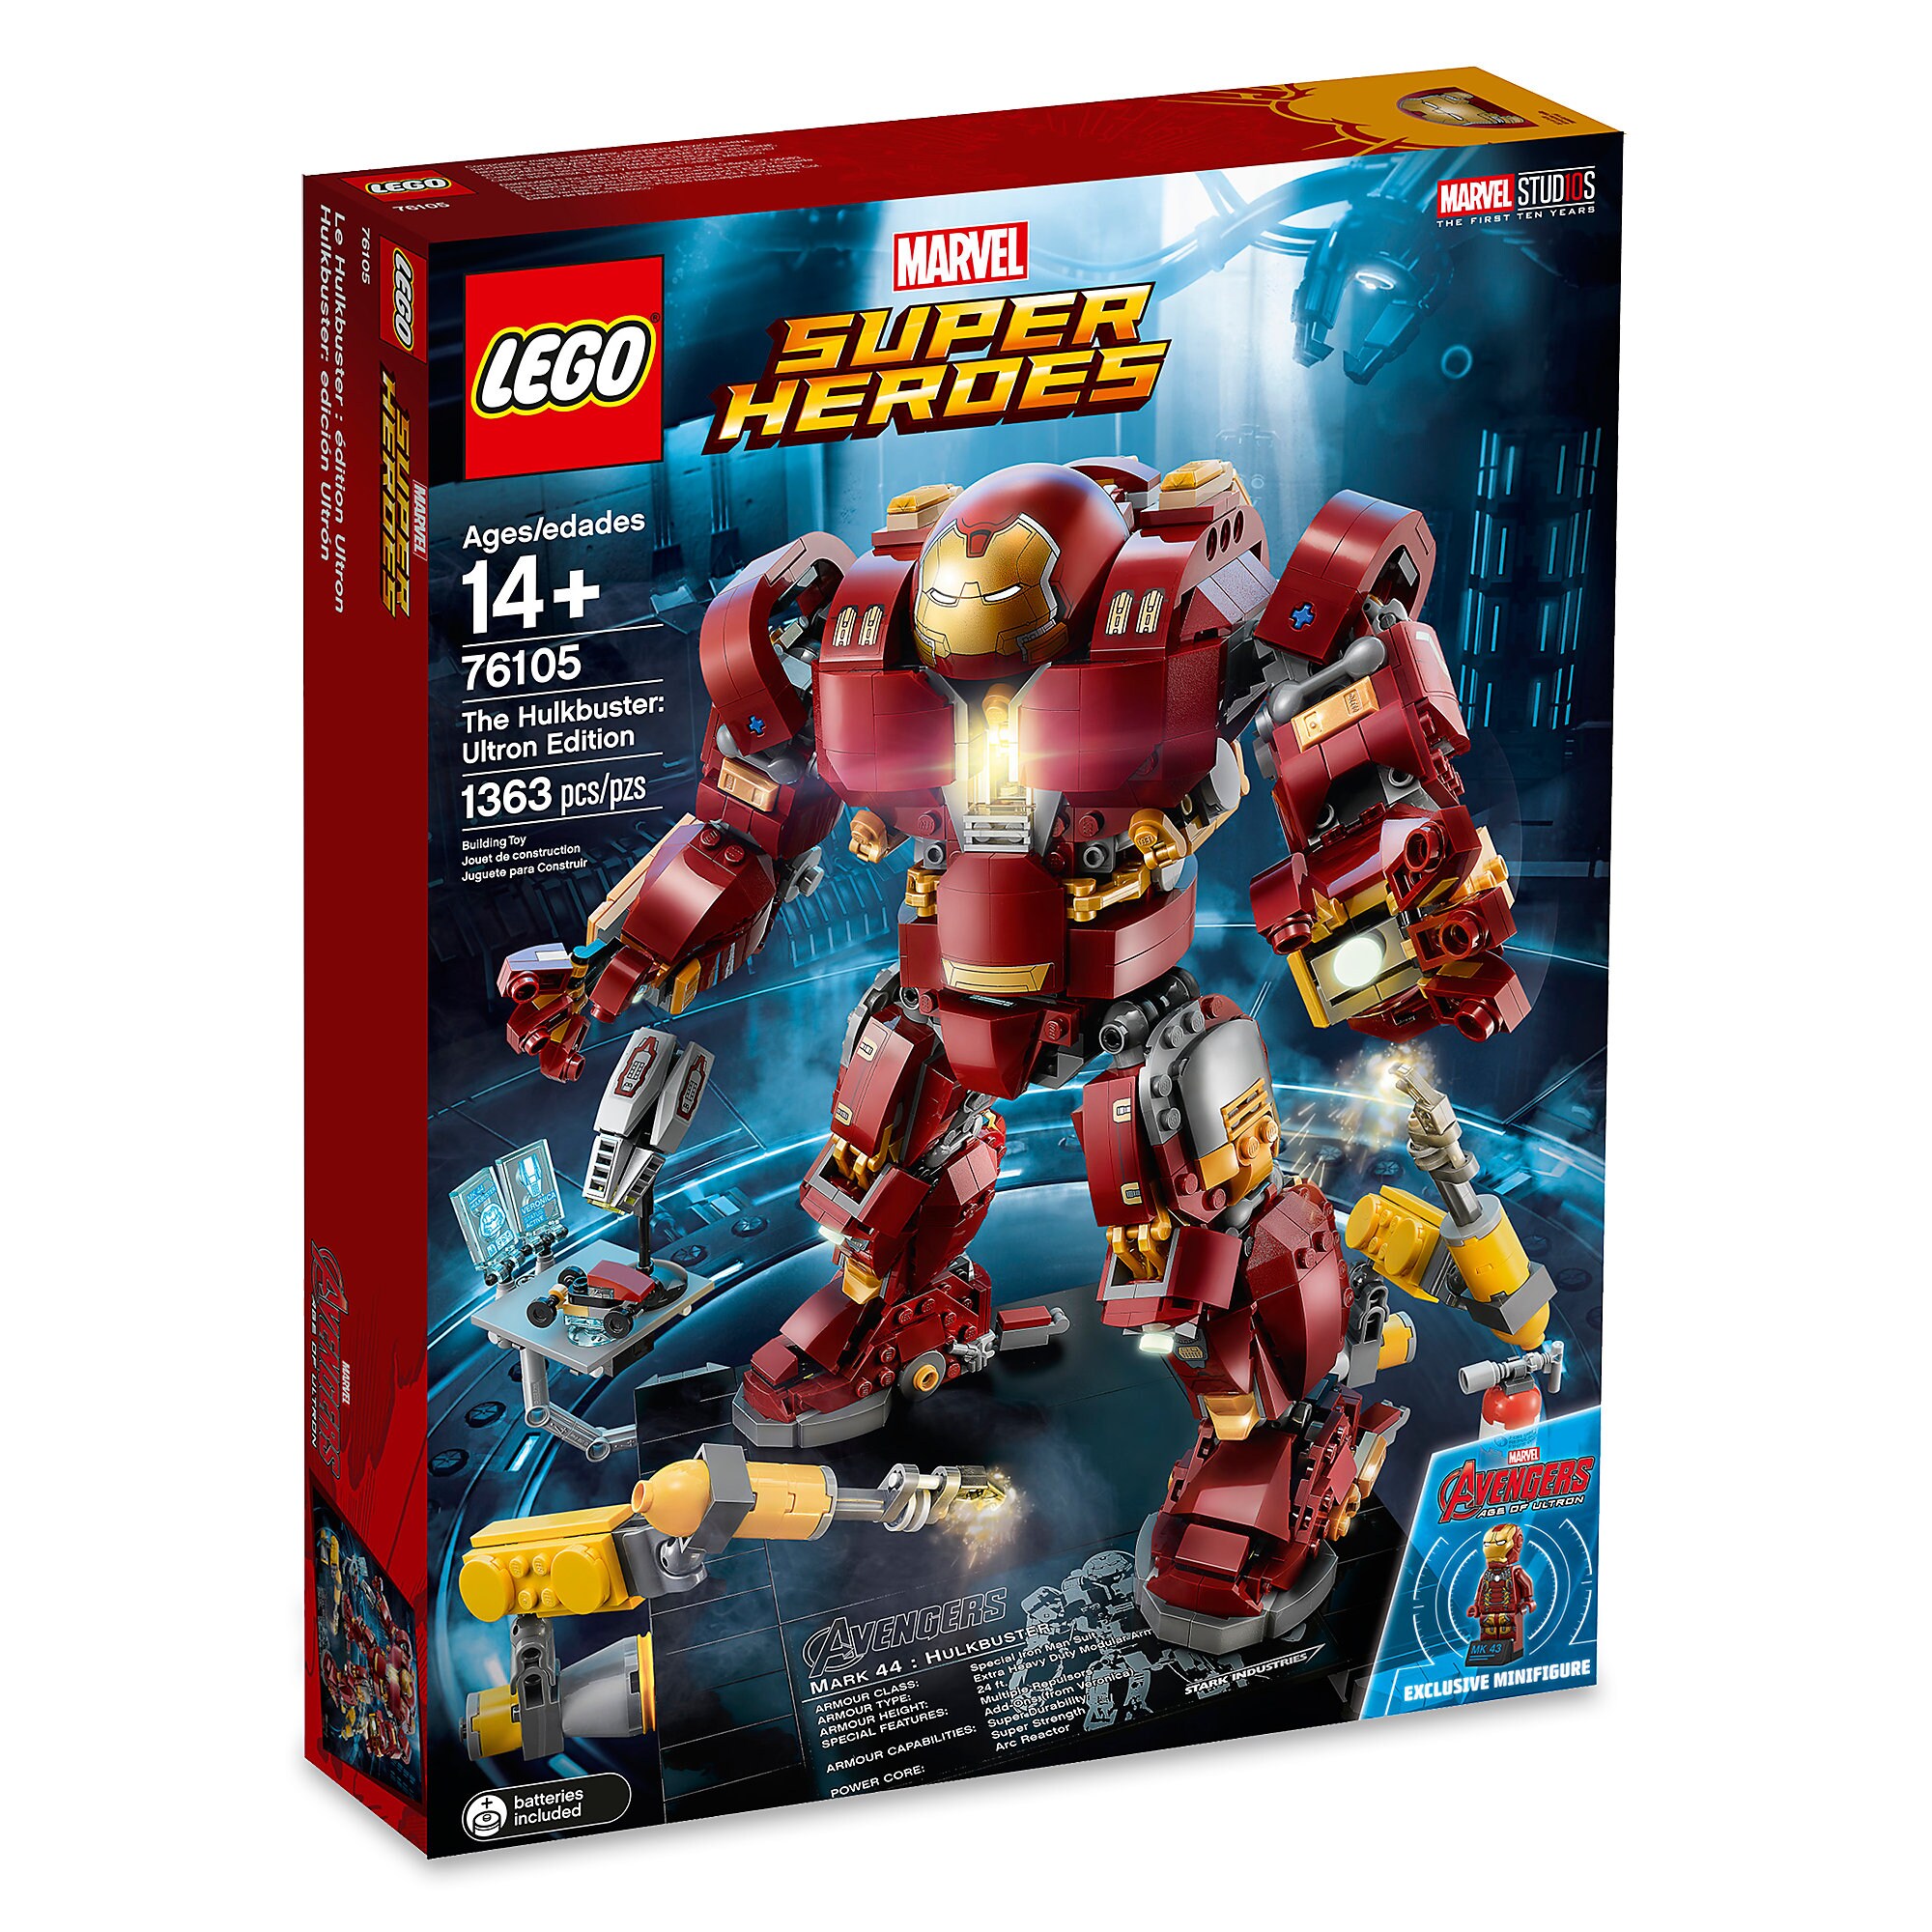 The Hulkbuster: Ultron Edition Playset by LEGO - Marvel's Avengers: Age of Ultron